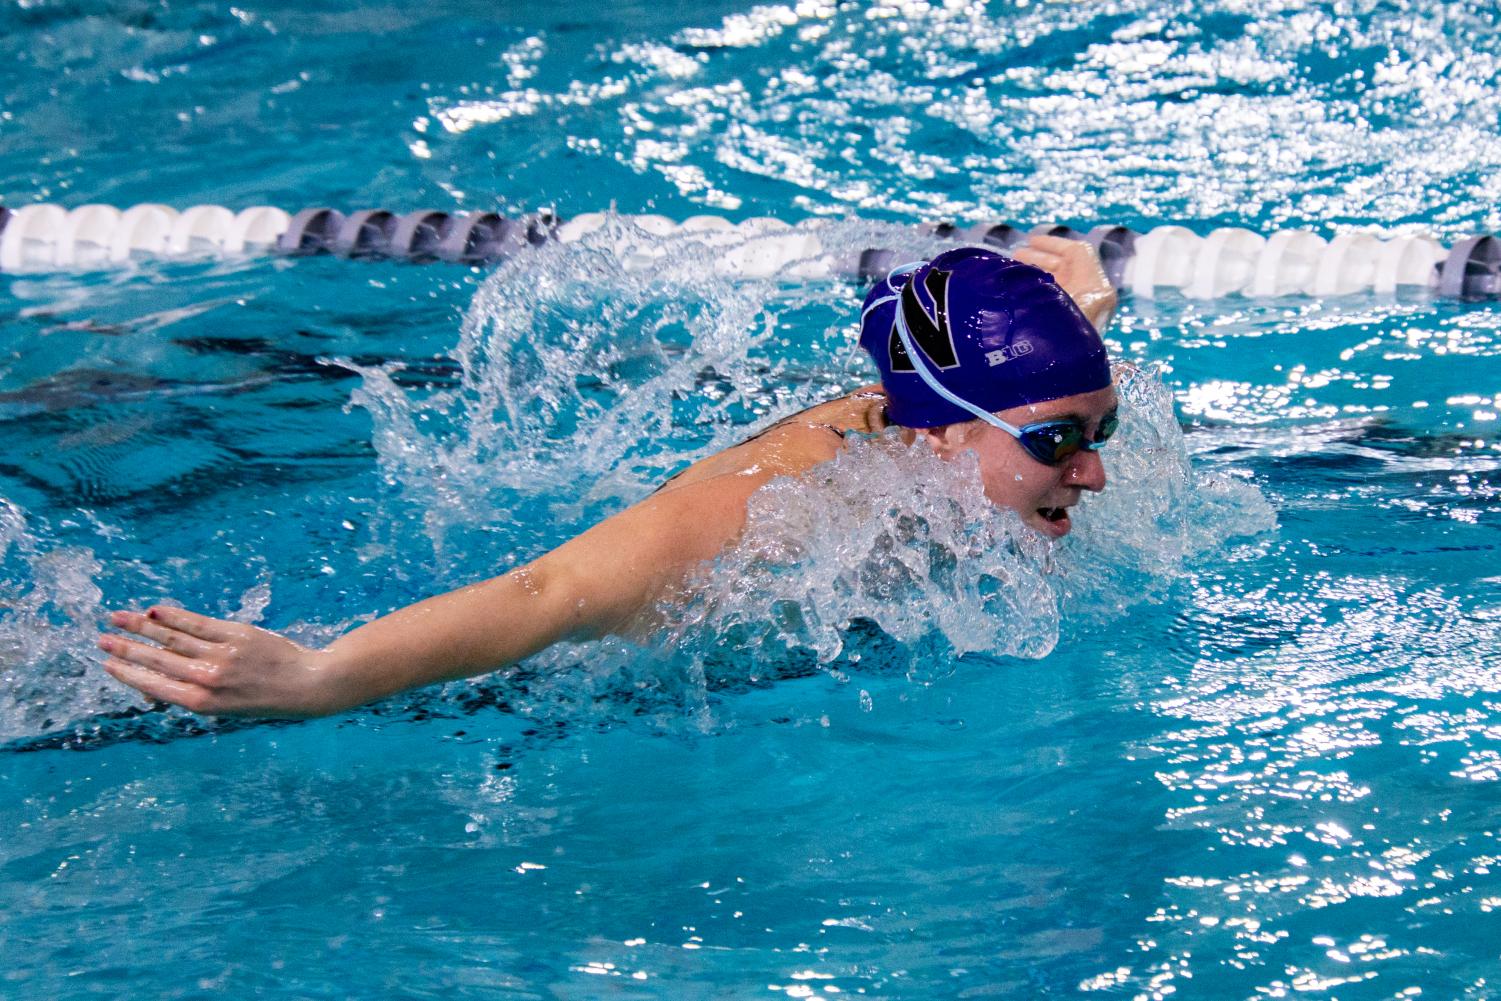 A person with a purple cap swims with their arms spread out on either side.